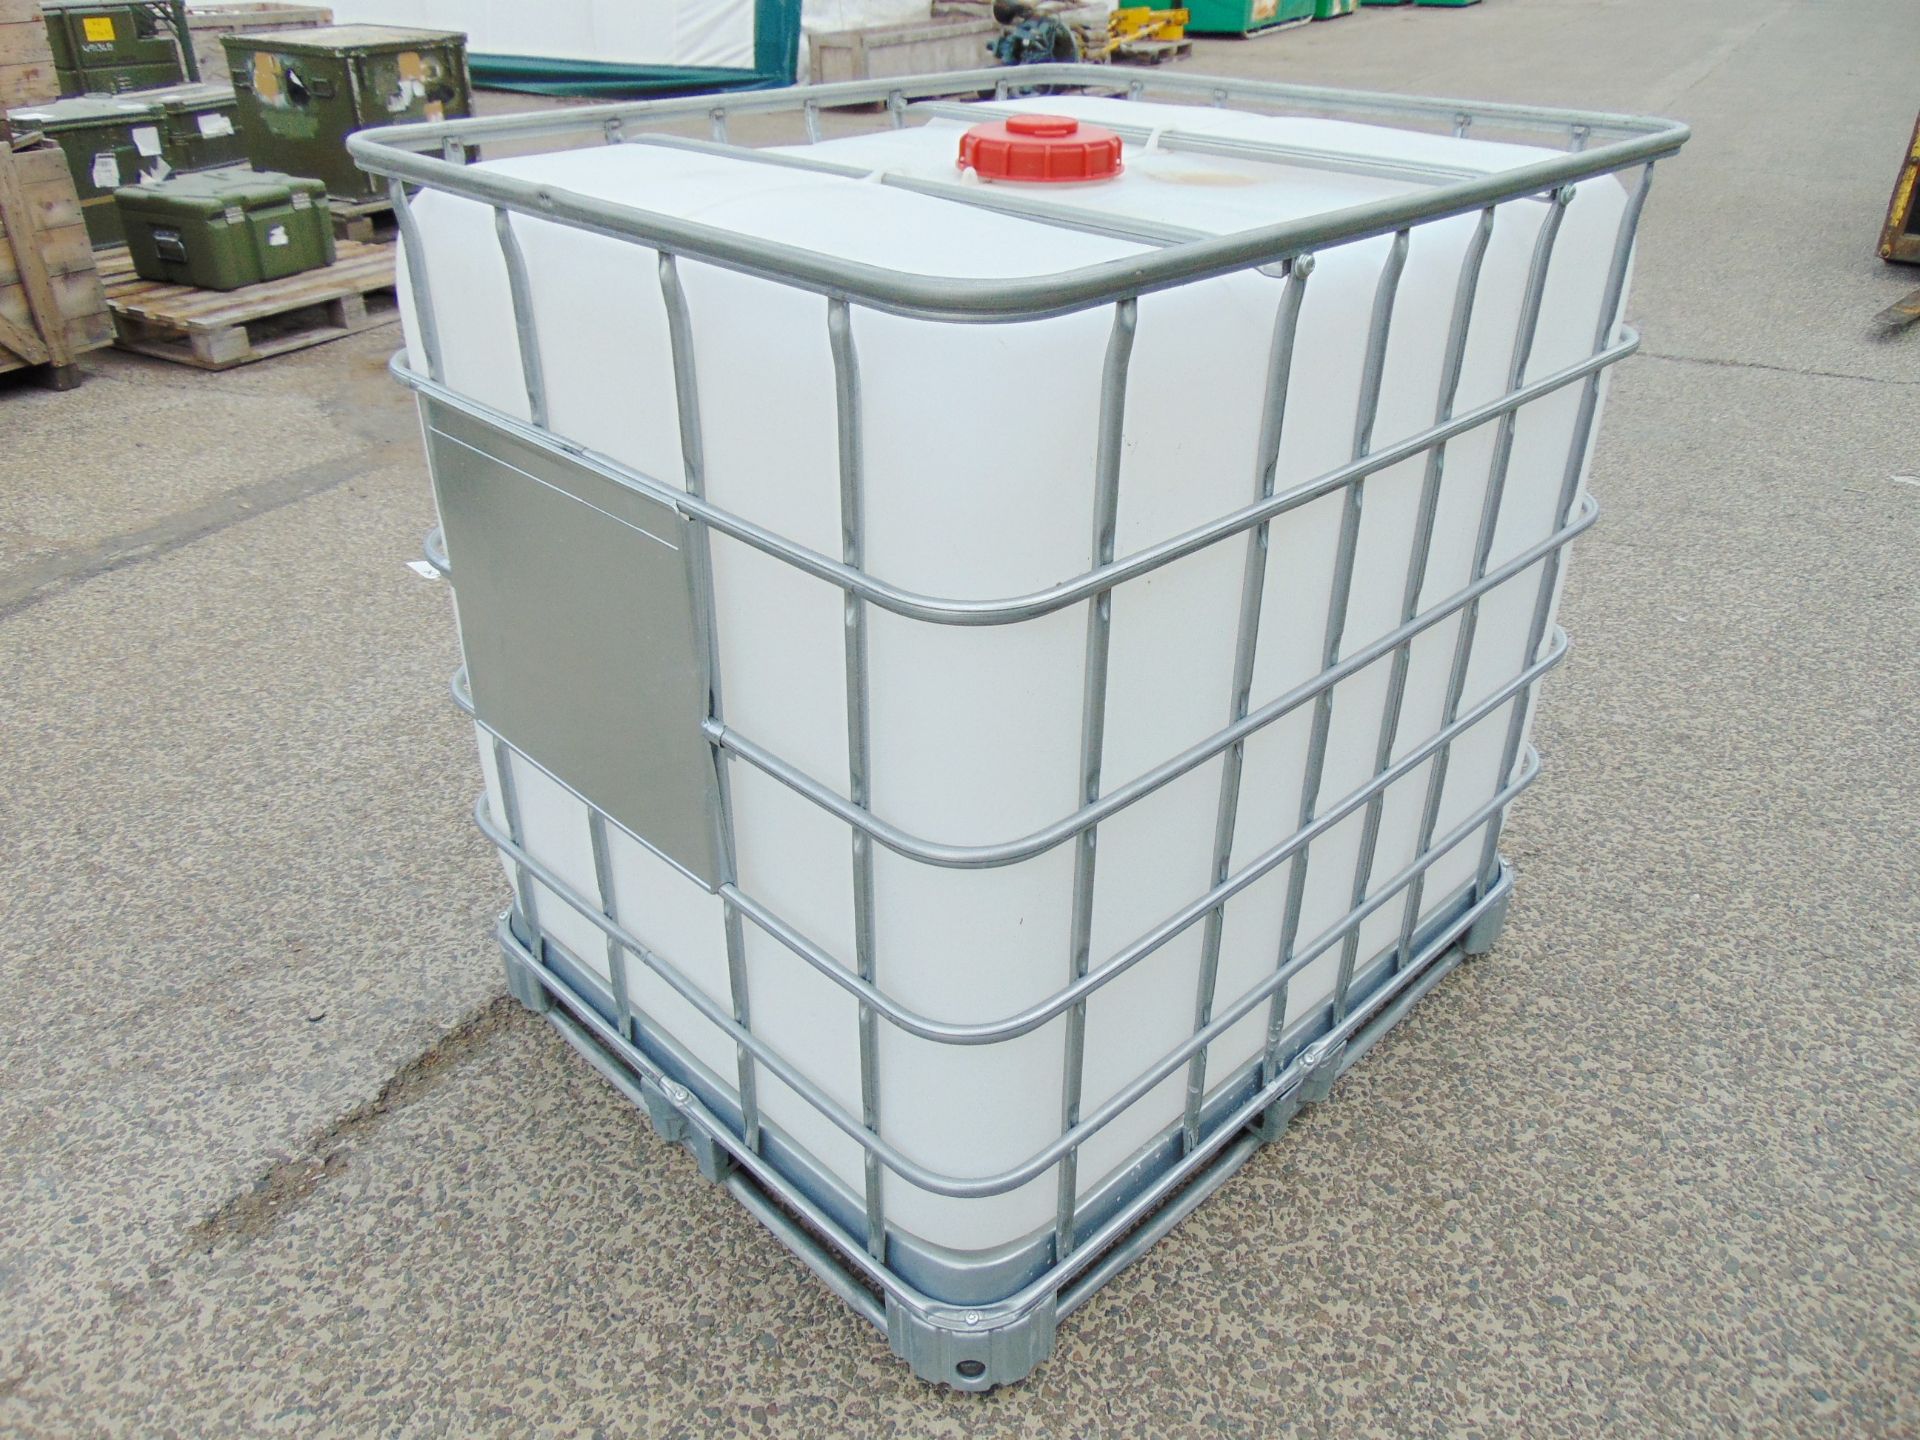 New Unused 1000 Litre Schutz IBC Container / Caged Water Tank - Image 4 of 7